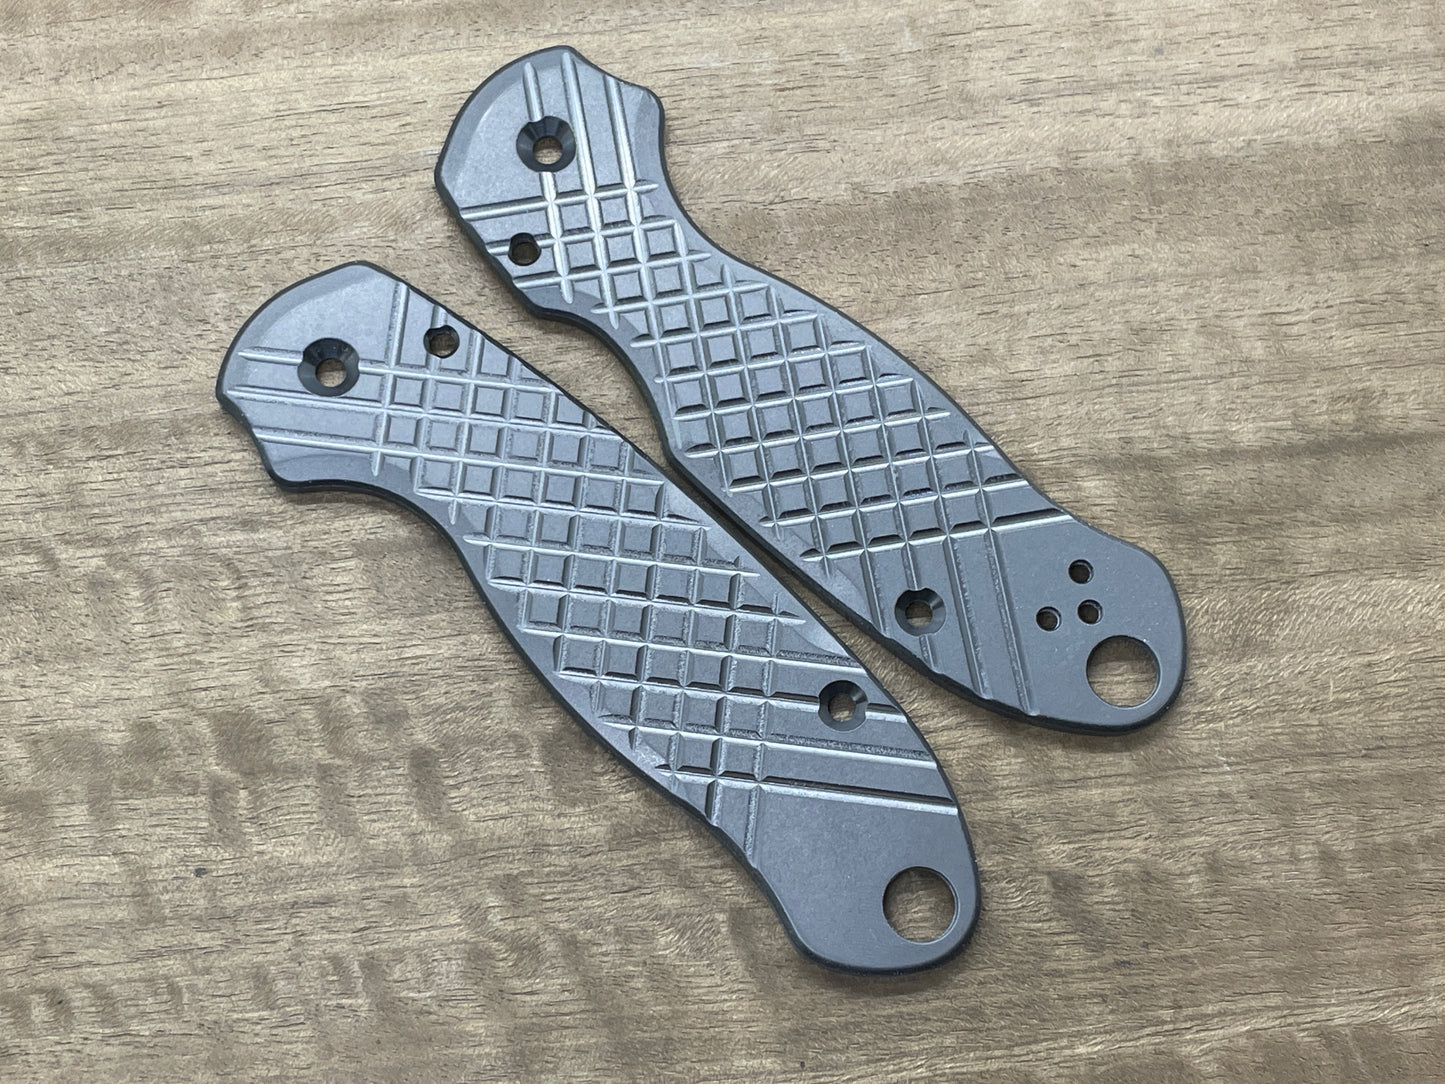 TUMBLED FRAG milled Zirconium scales for Spyderco Para 3